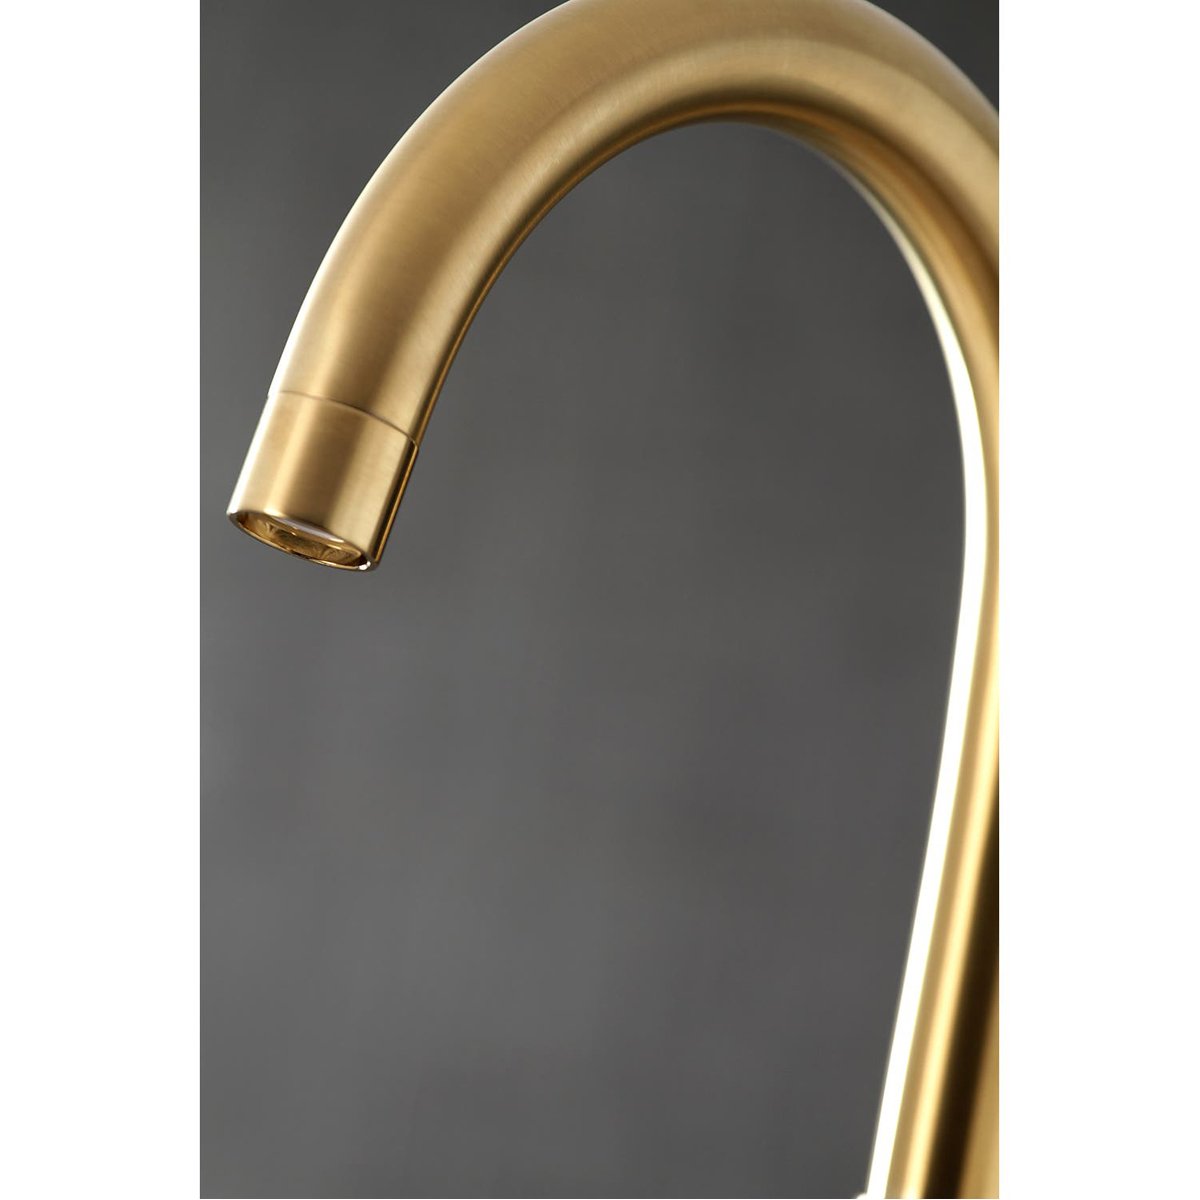 Kingston Brass Concord Deck Mount Tub Filler with Hand Shower